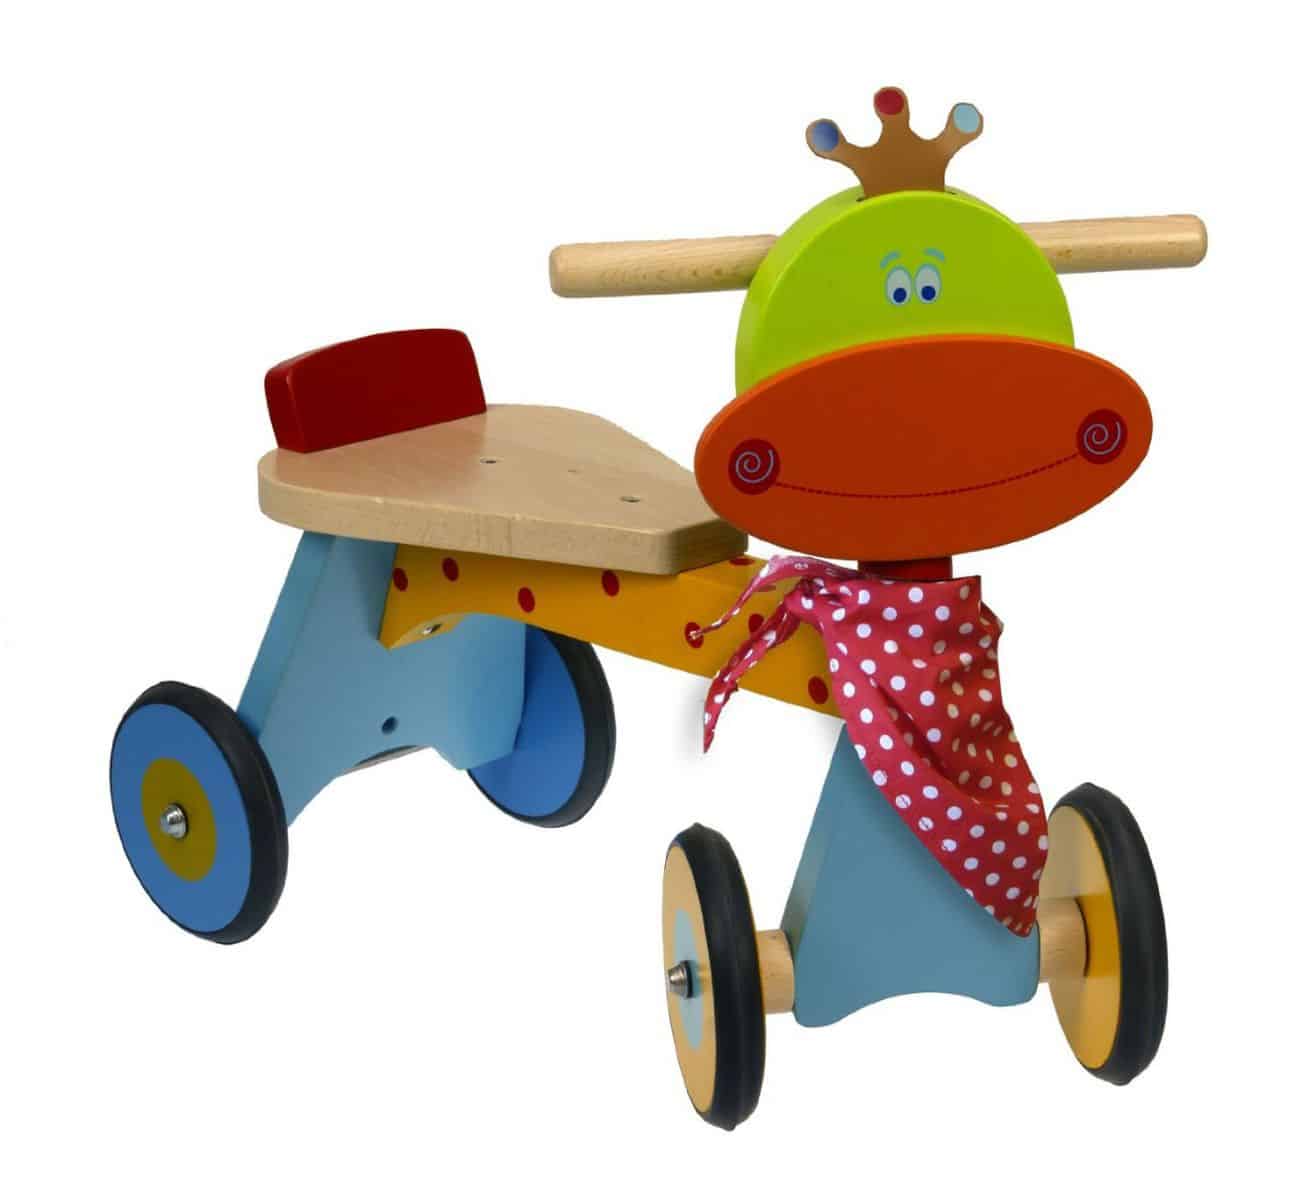 hello, Wonderful - 8 STARTER WOODEN RIDE-ON TOYS FOR TODDLERS